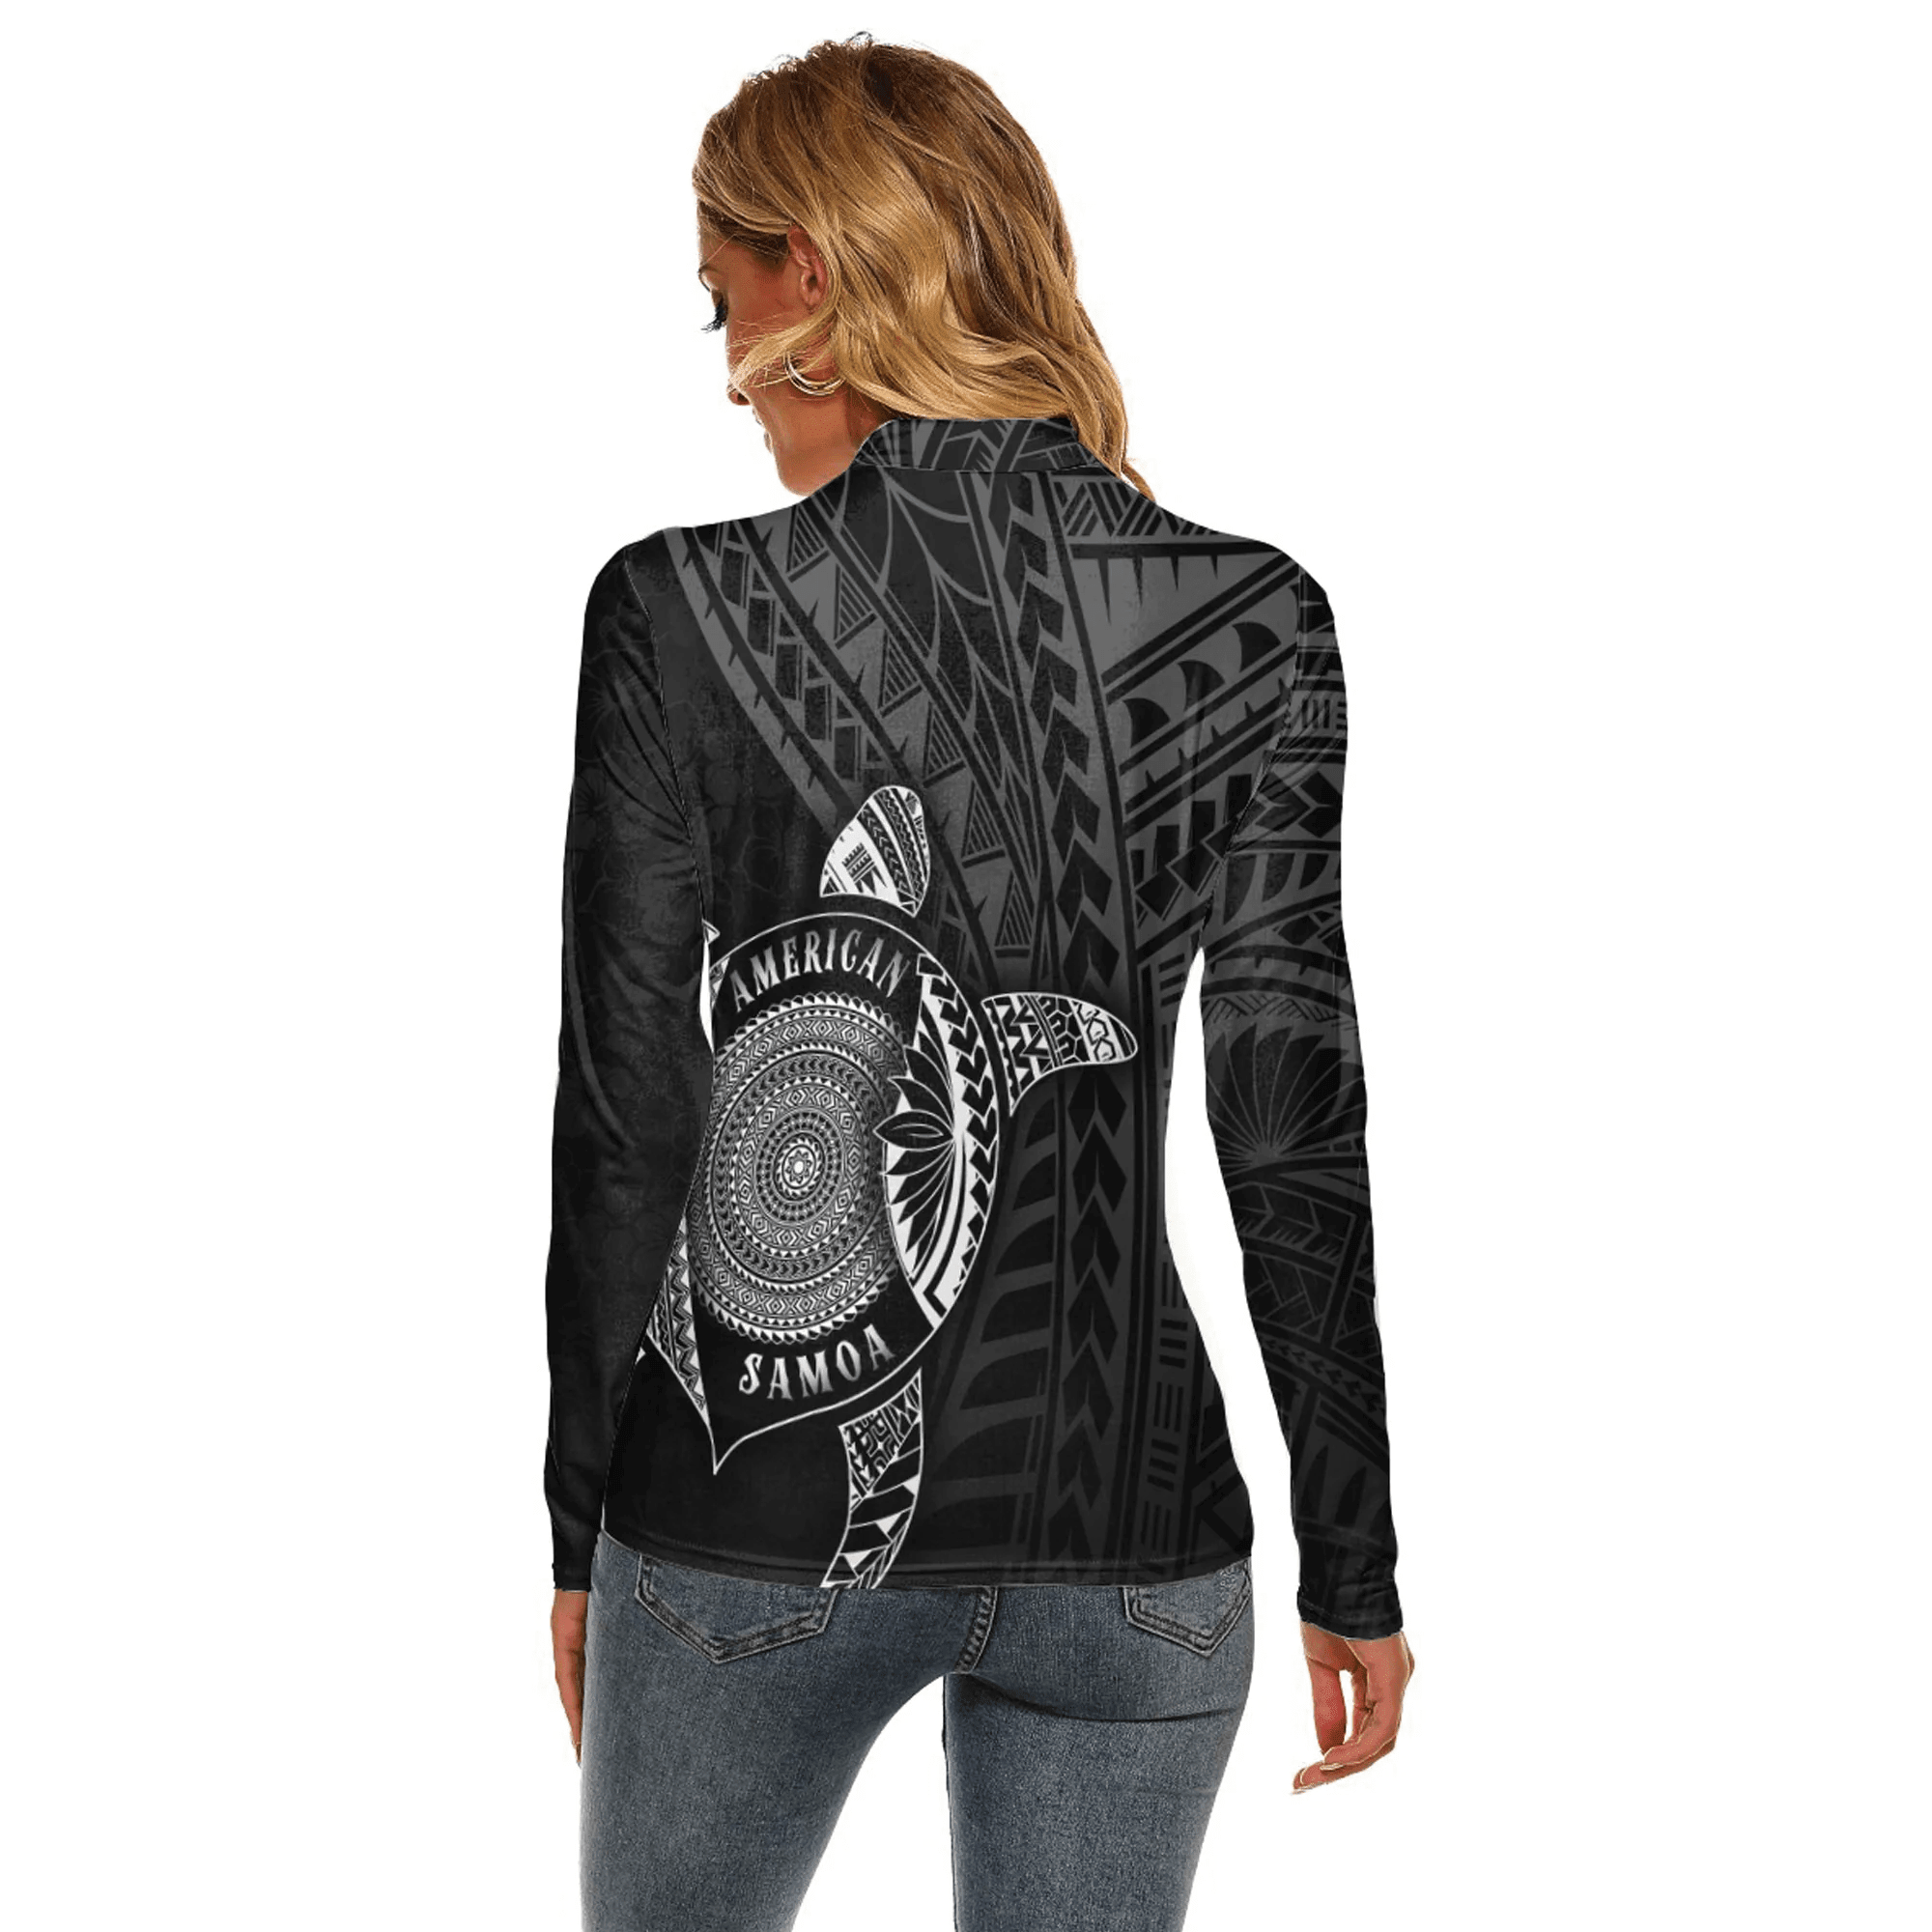 Love New Zealand Clothing - American Samoa Polynesia Turtle Coat Of Arms Women's Stretchable Turtleneck Top A95 | Love New Zealand